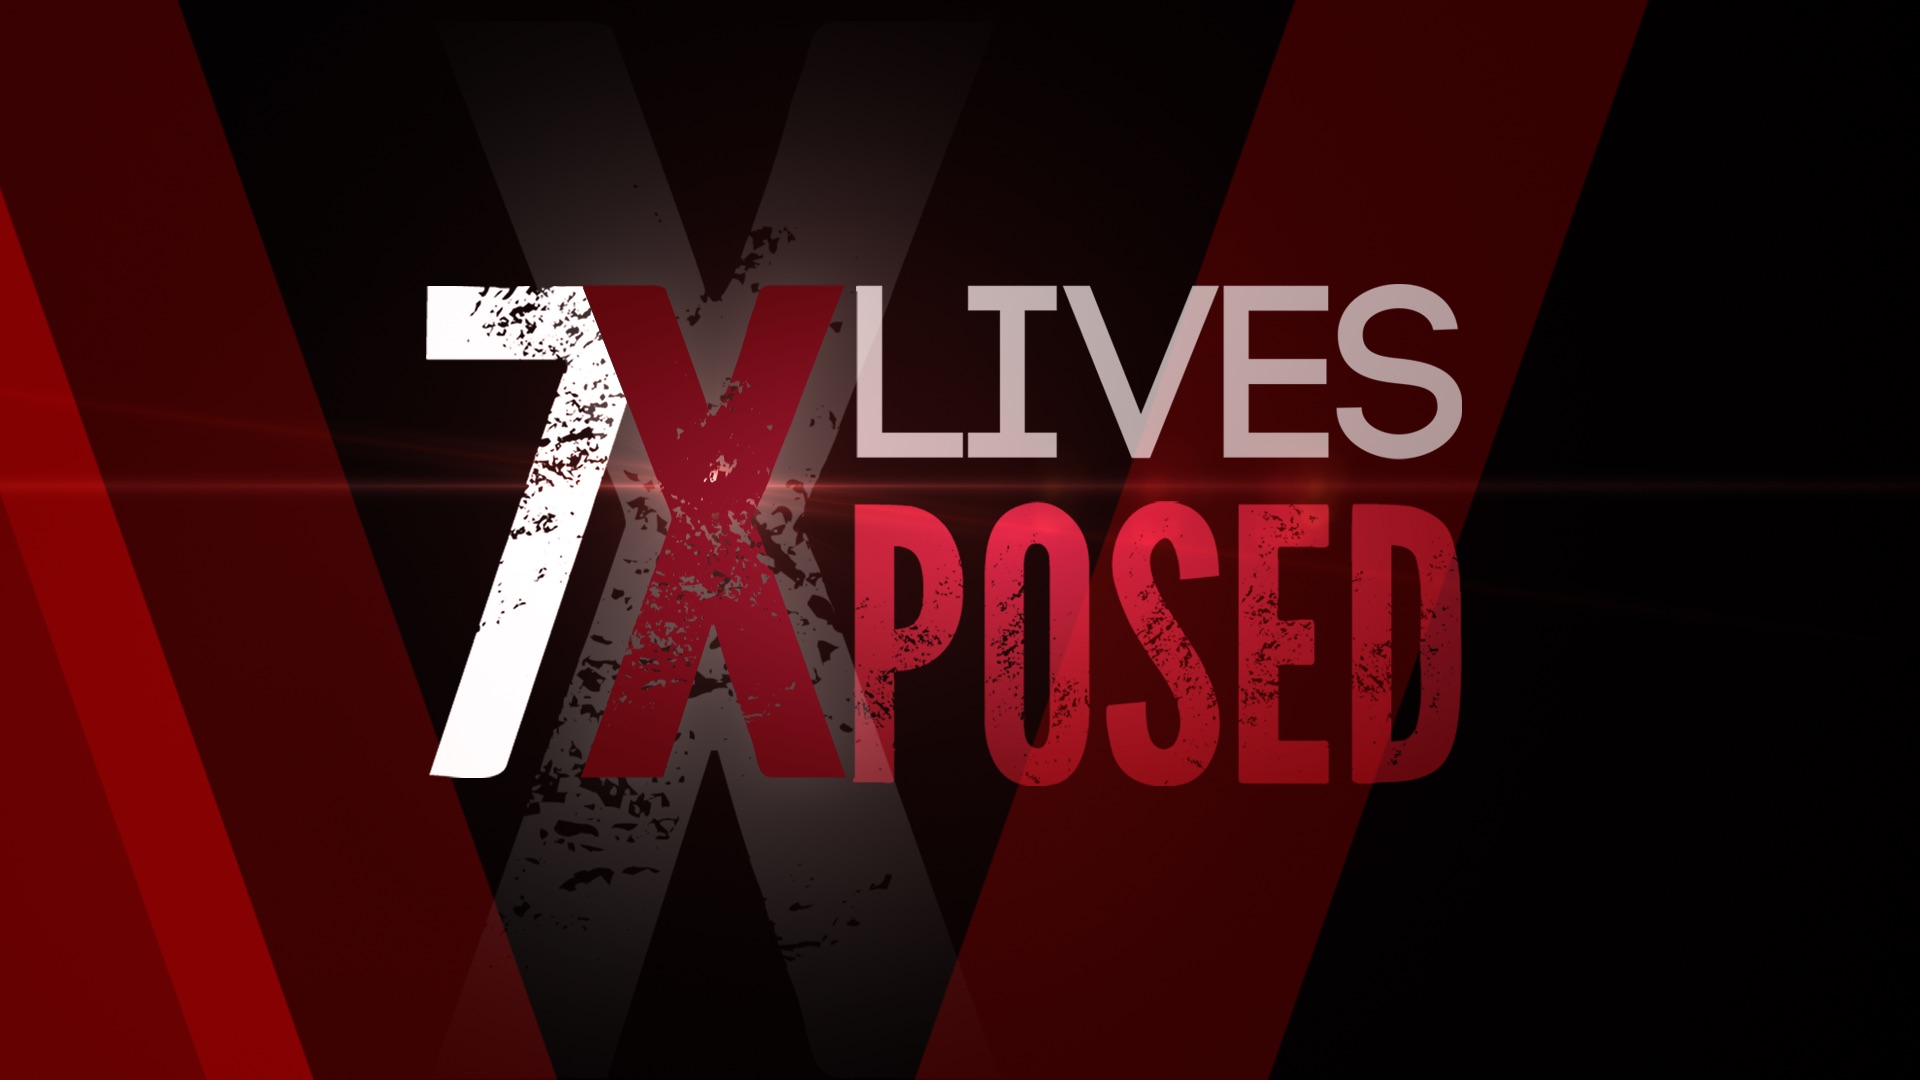 anne menzel add photo 7 lives xposed tv show episodes